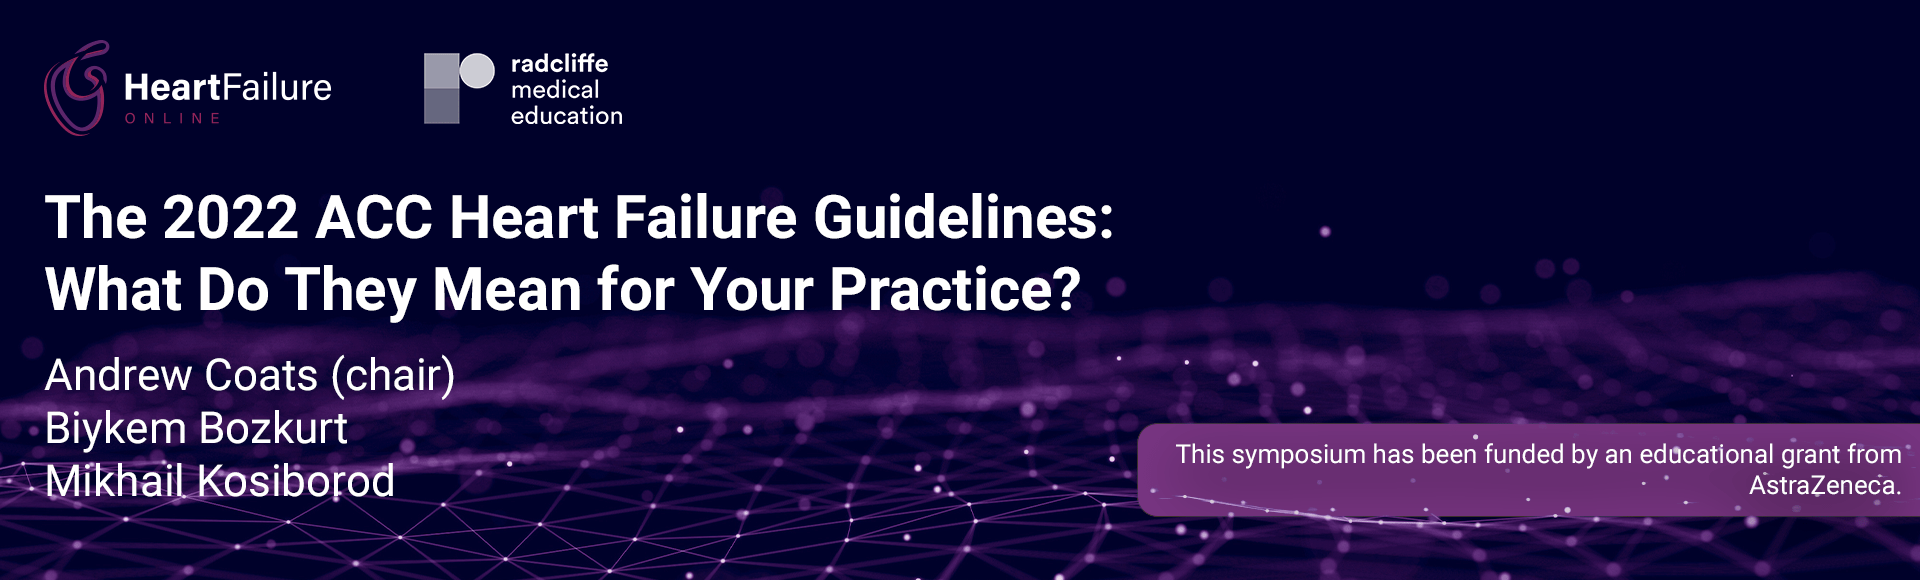 The 2022 ACC HF Guidelines: What Do They Mean for Your Practice?